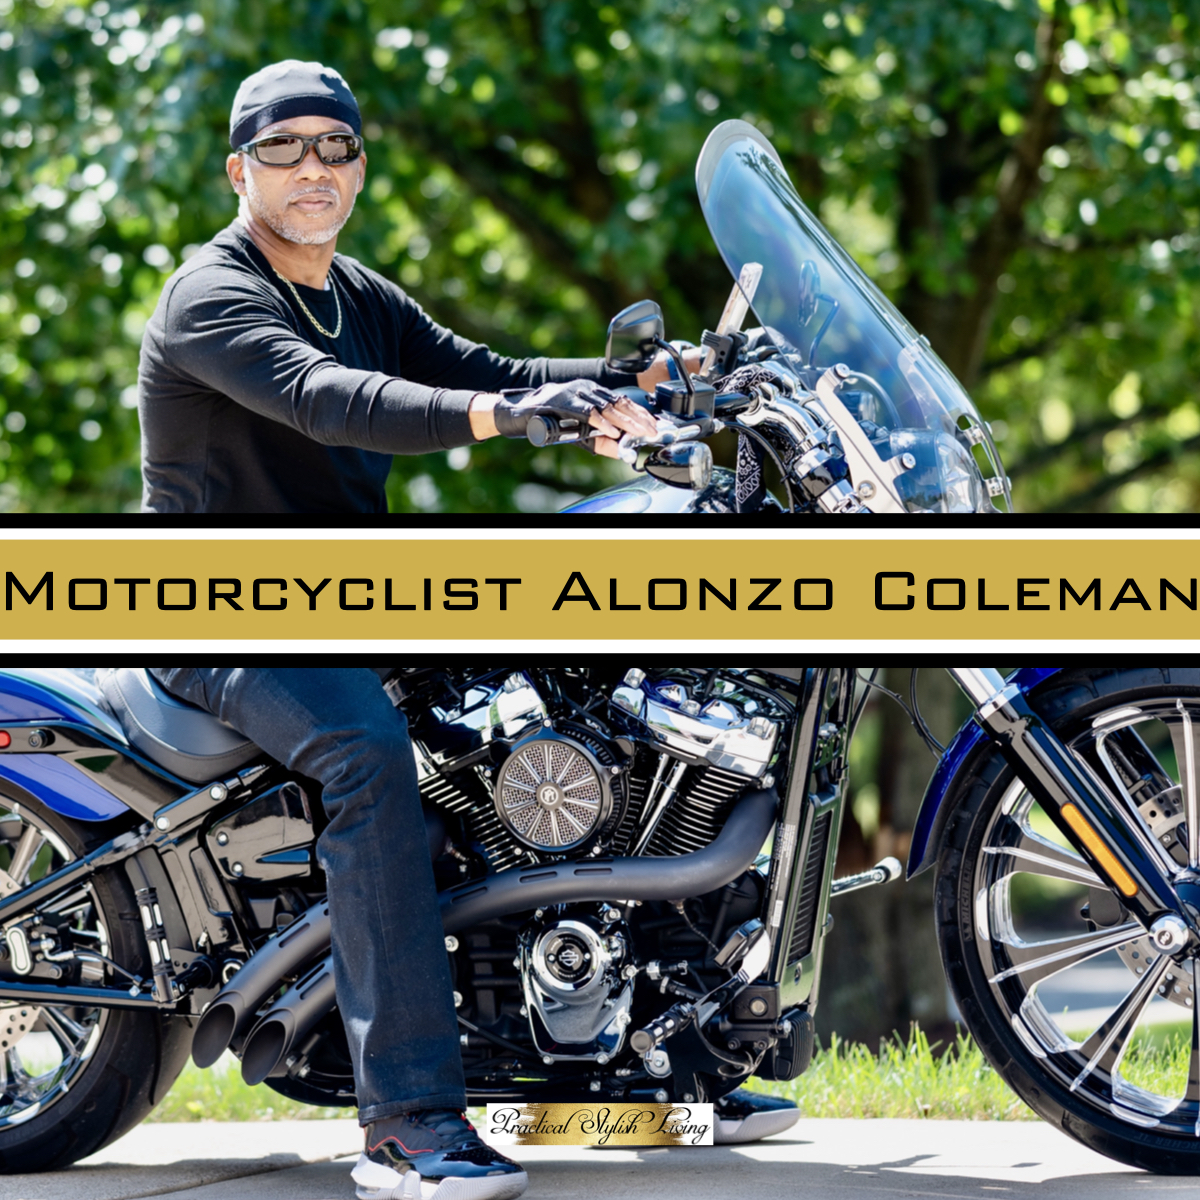 Motorcyclist Alonzo Coleman | Practical Stylish Living | Motorcycle Lifestyle